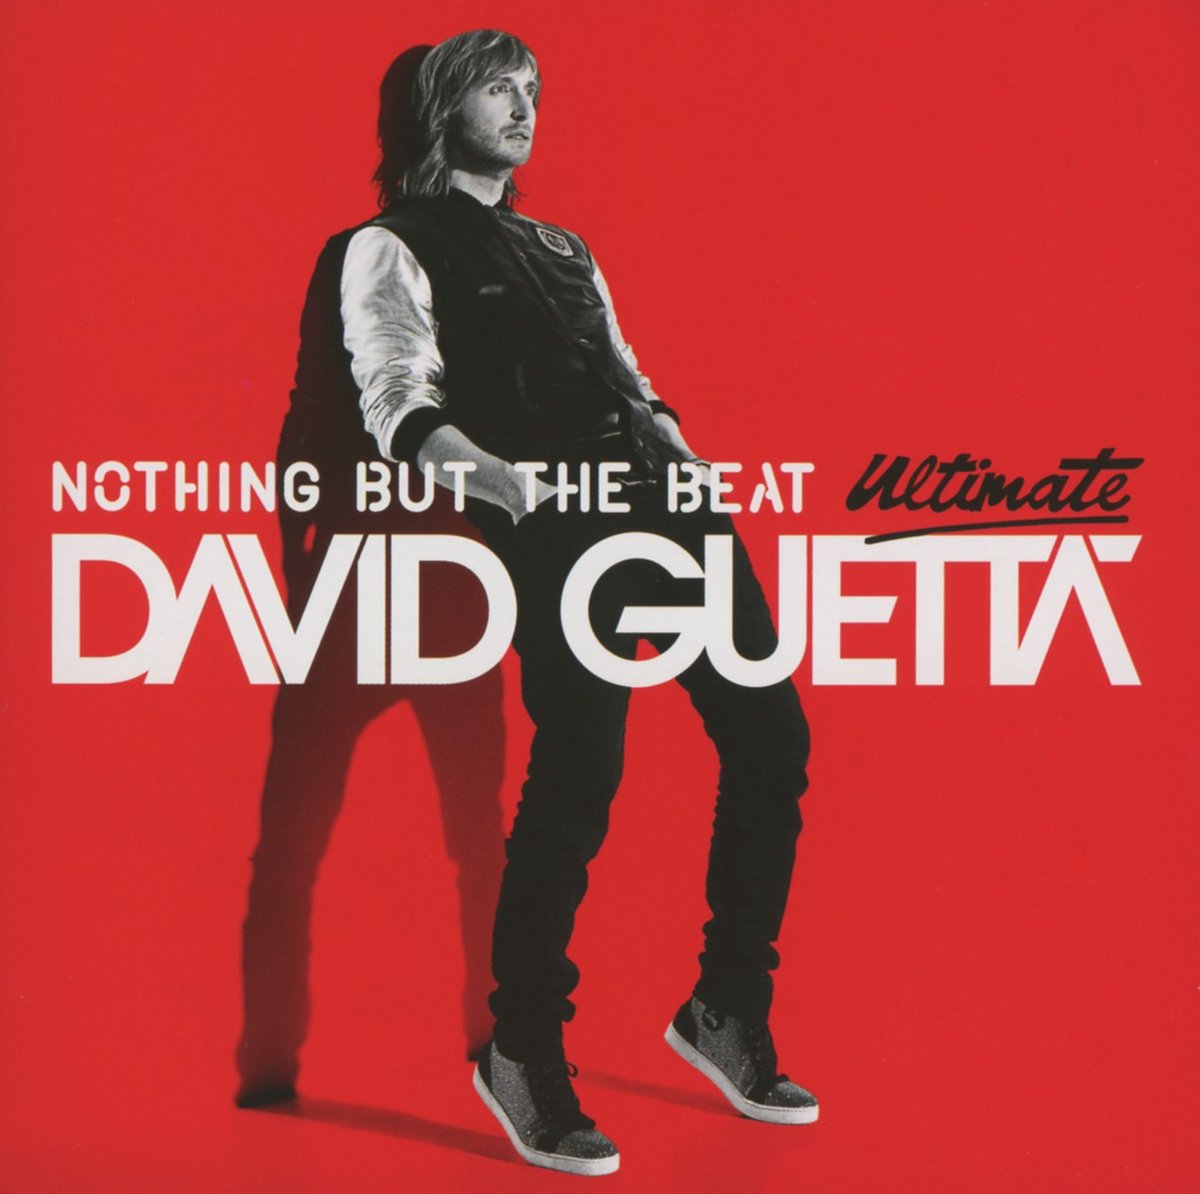 Nothing But The Beat Ultimate - David Guetta